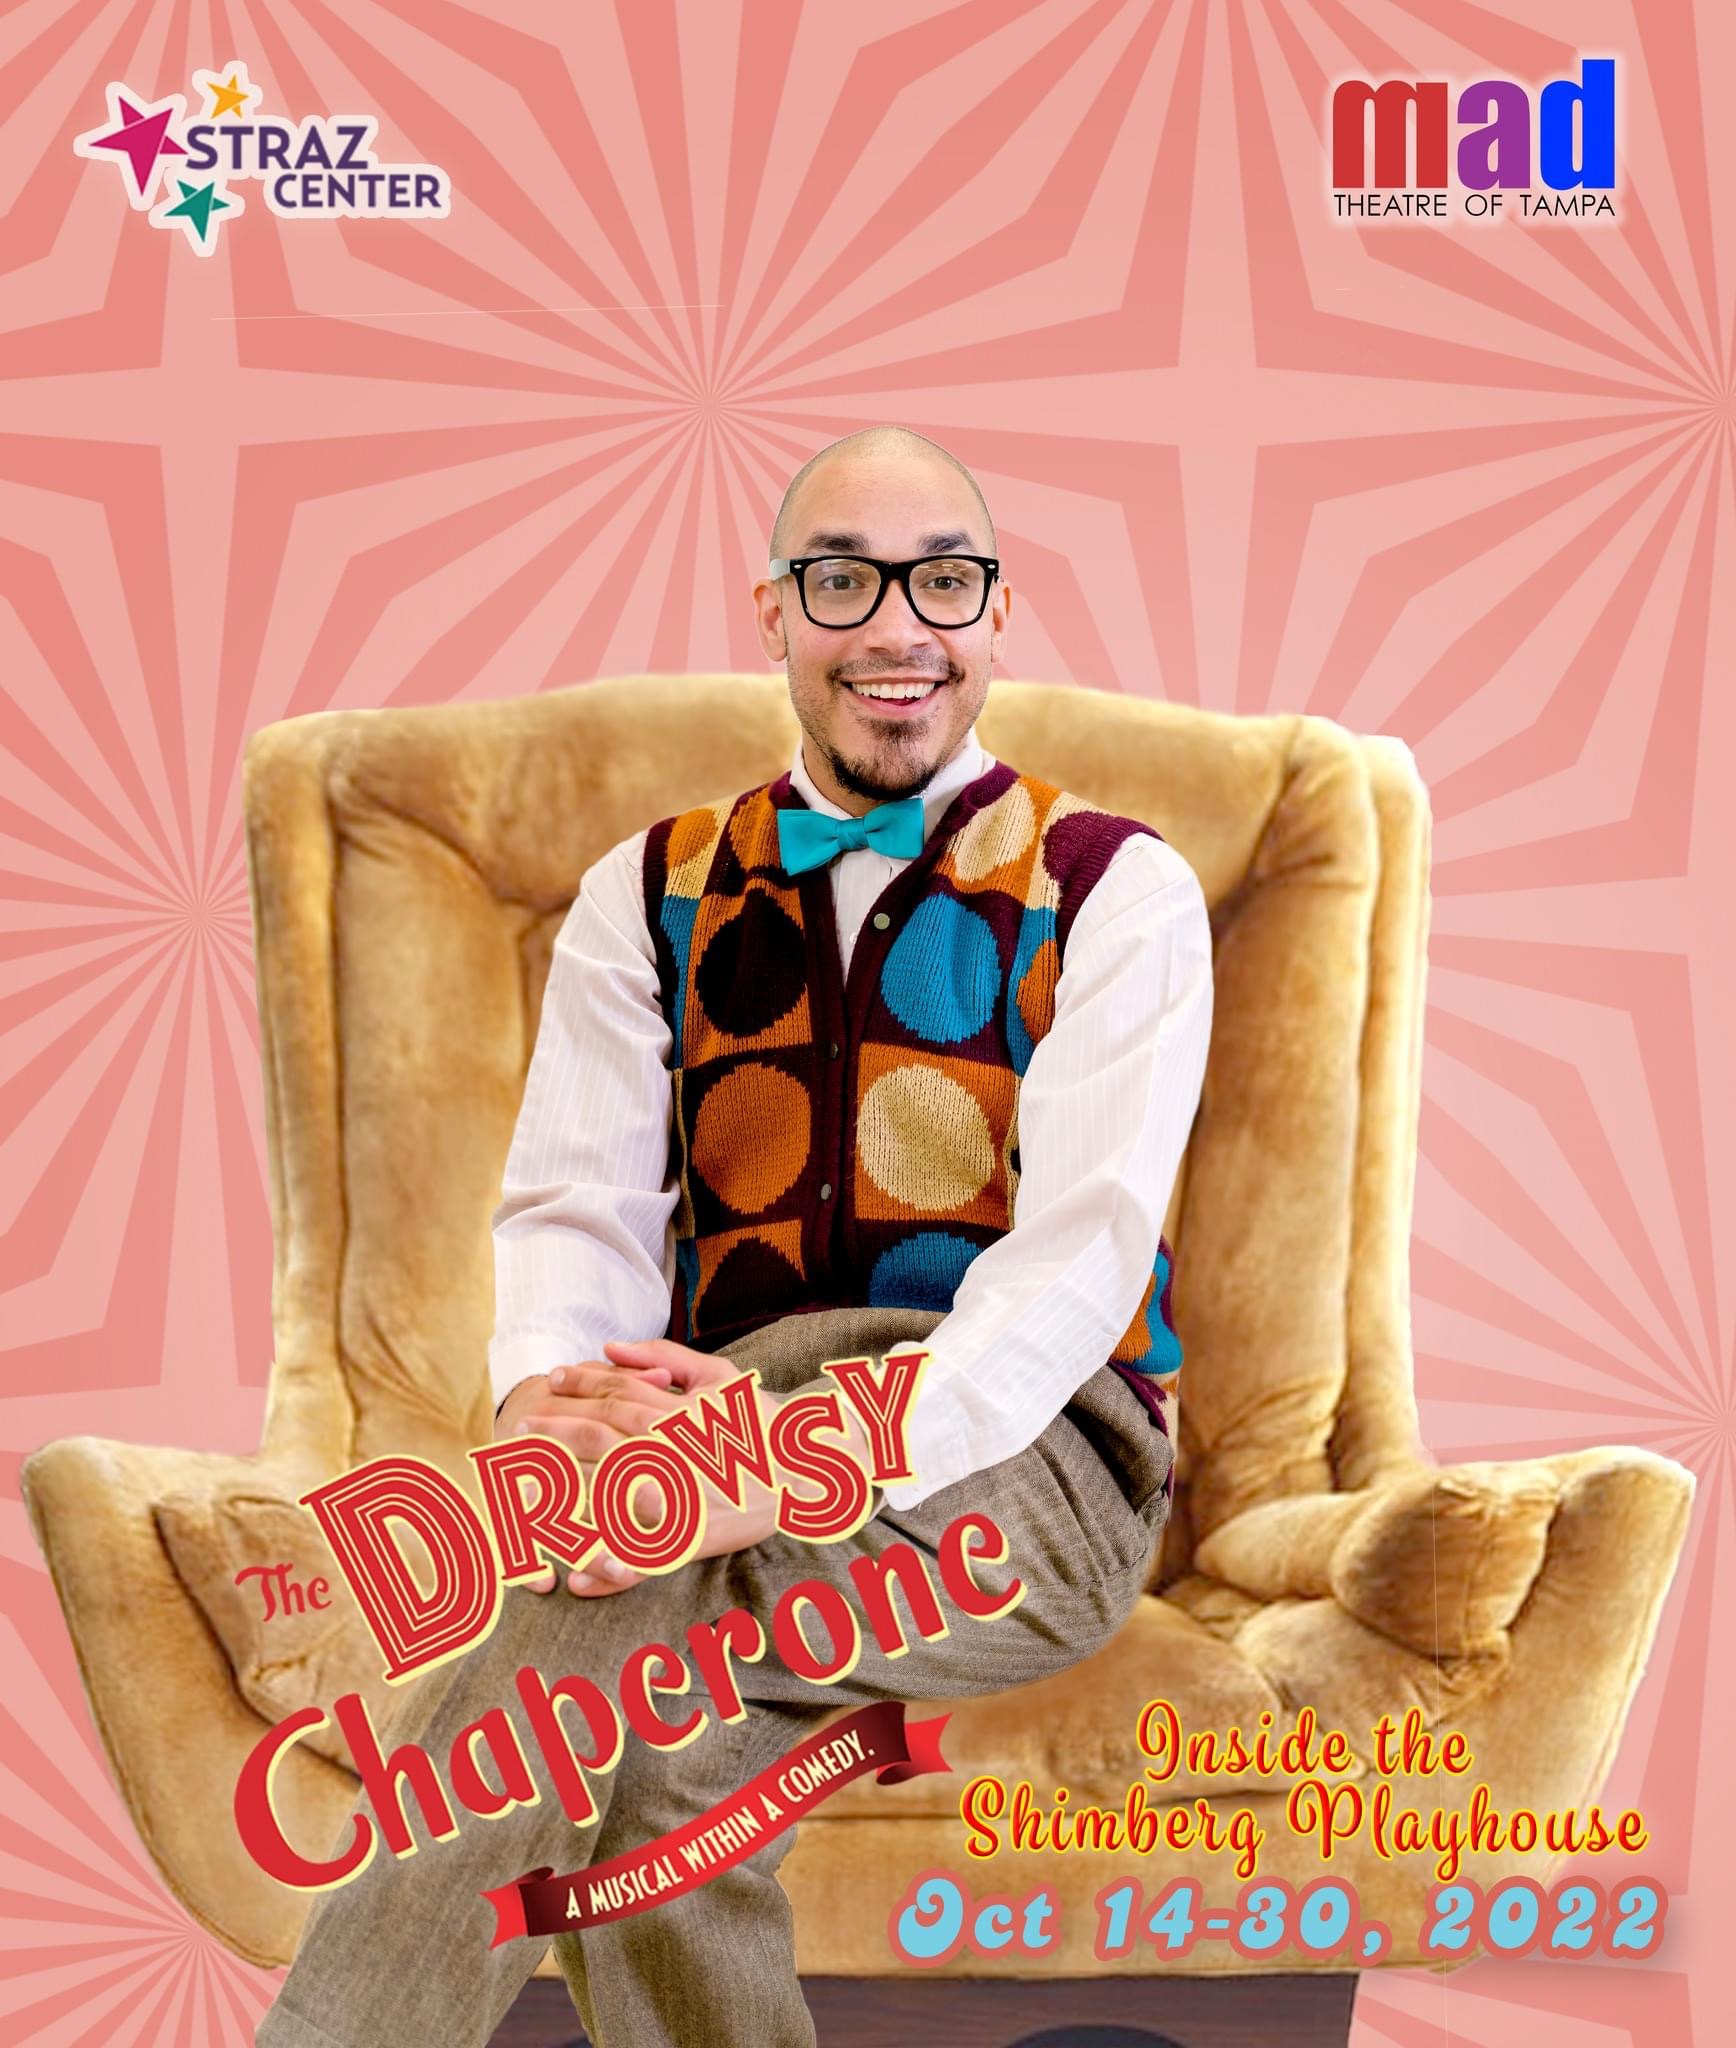 Meet Man in Chair as played by Doug Buffaloe in mad Theatre of Tampa’s “The Drowsy Chaperone